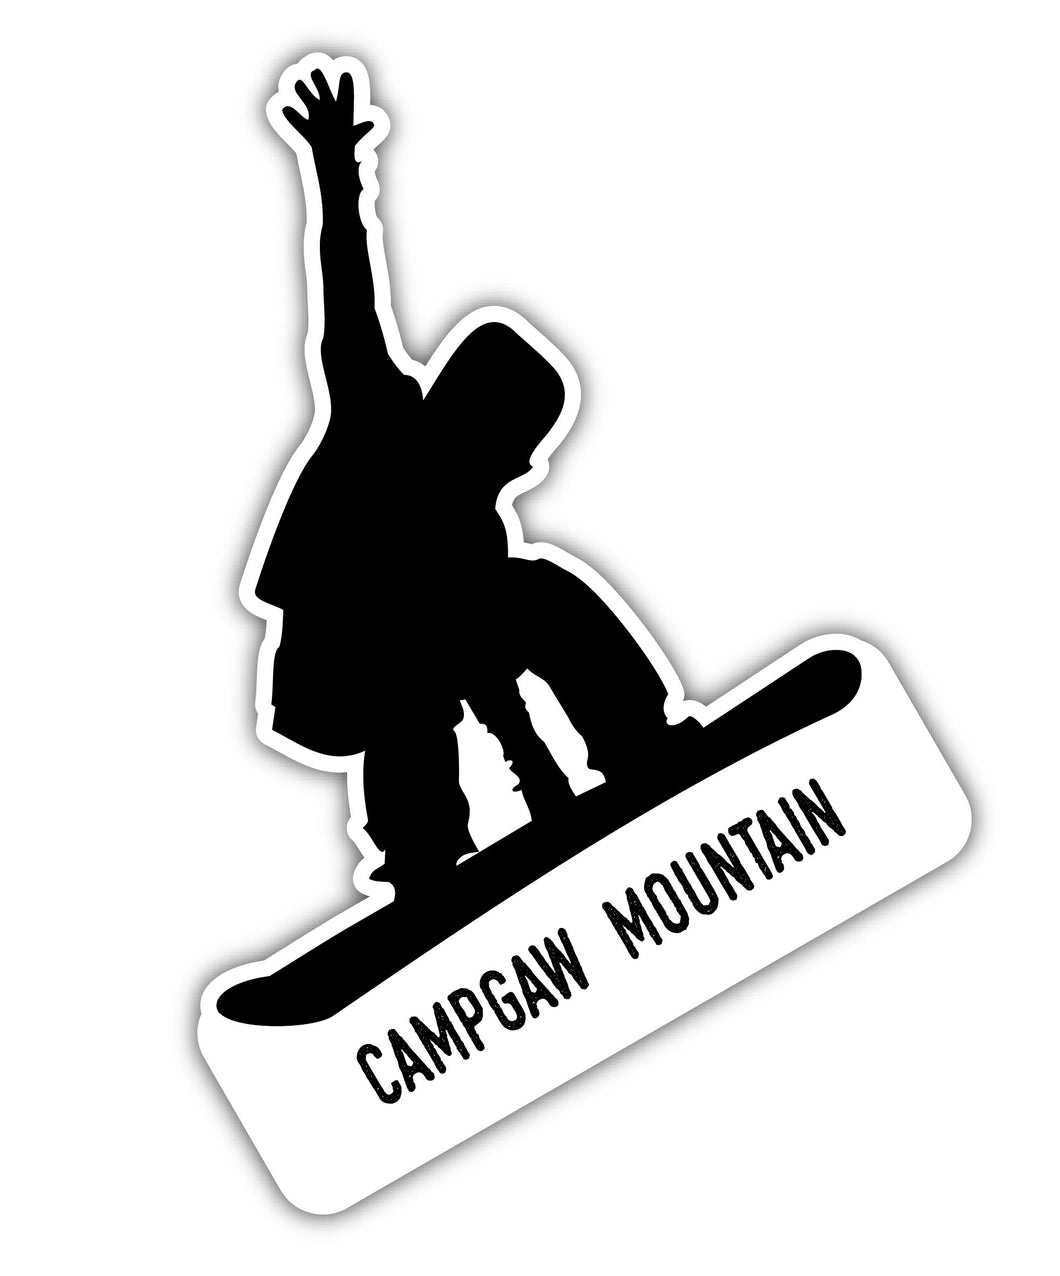 Campgaw Mountain New Jersey Ski Adventures Souvenir Approximately 5 x 2.5-Inch Vinyl Decal Sticker Goggle Design